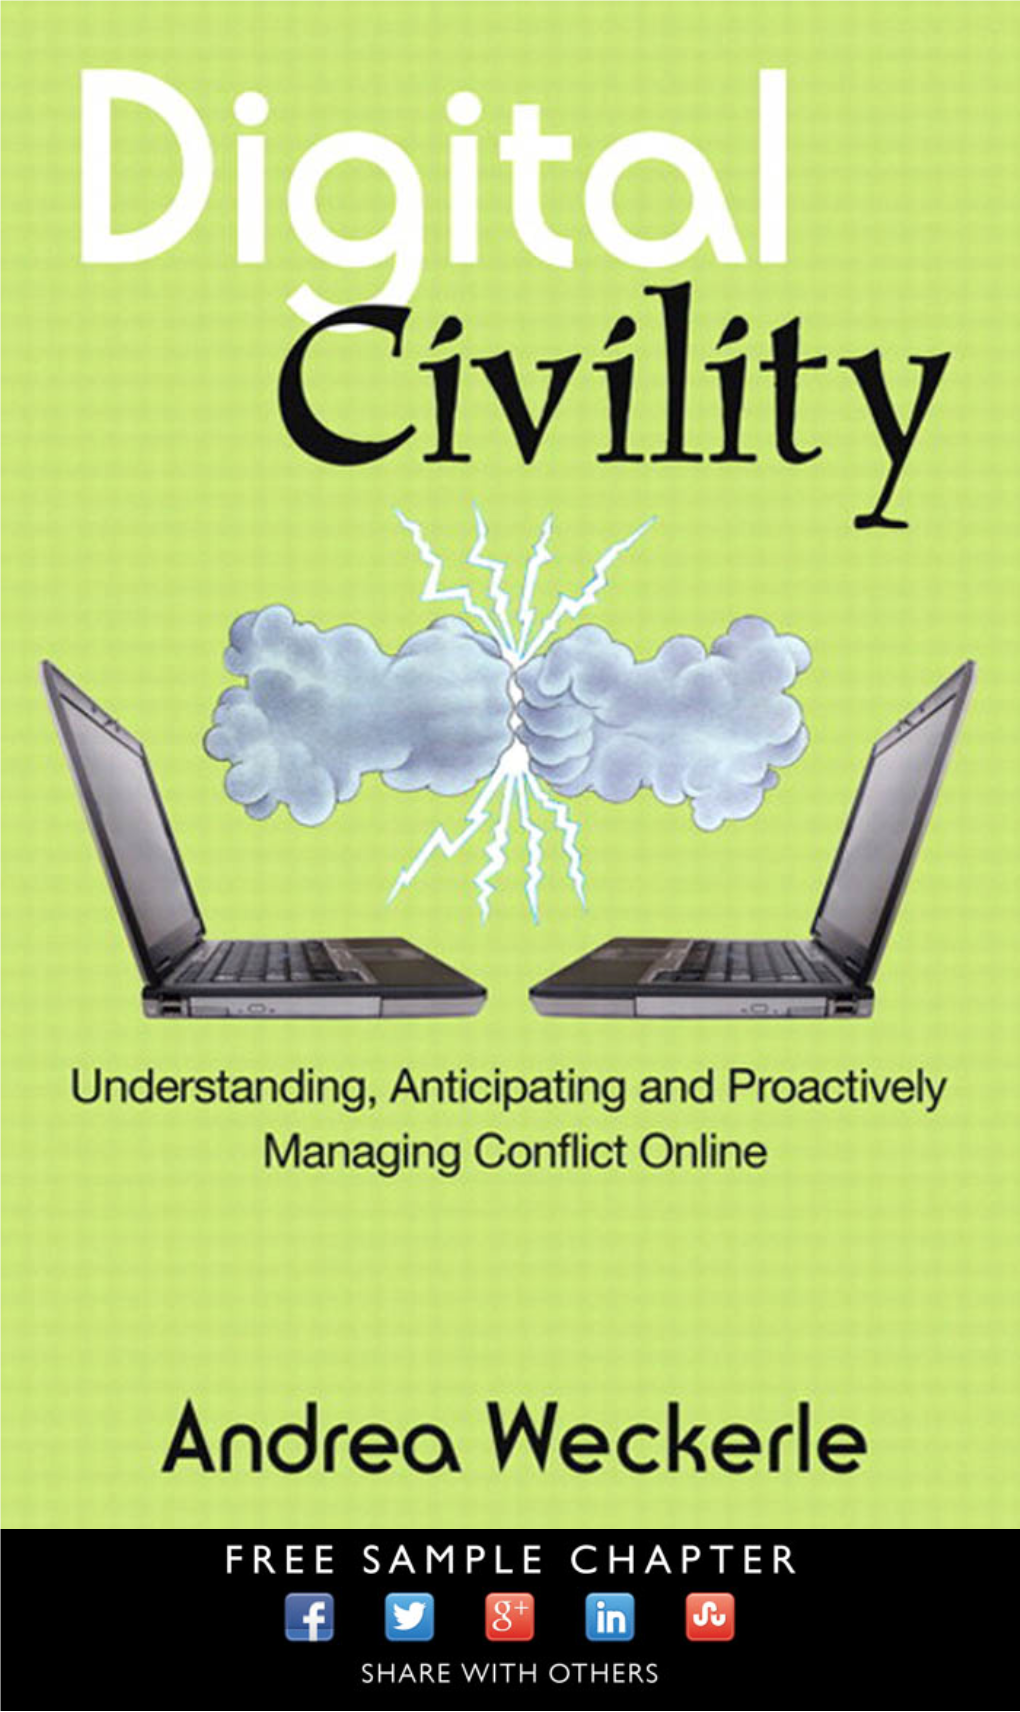 Civility in the Digital Age How Companies and People Can Triumph Over Haters, Trolls, Bullies, and Other Jerks